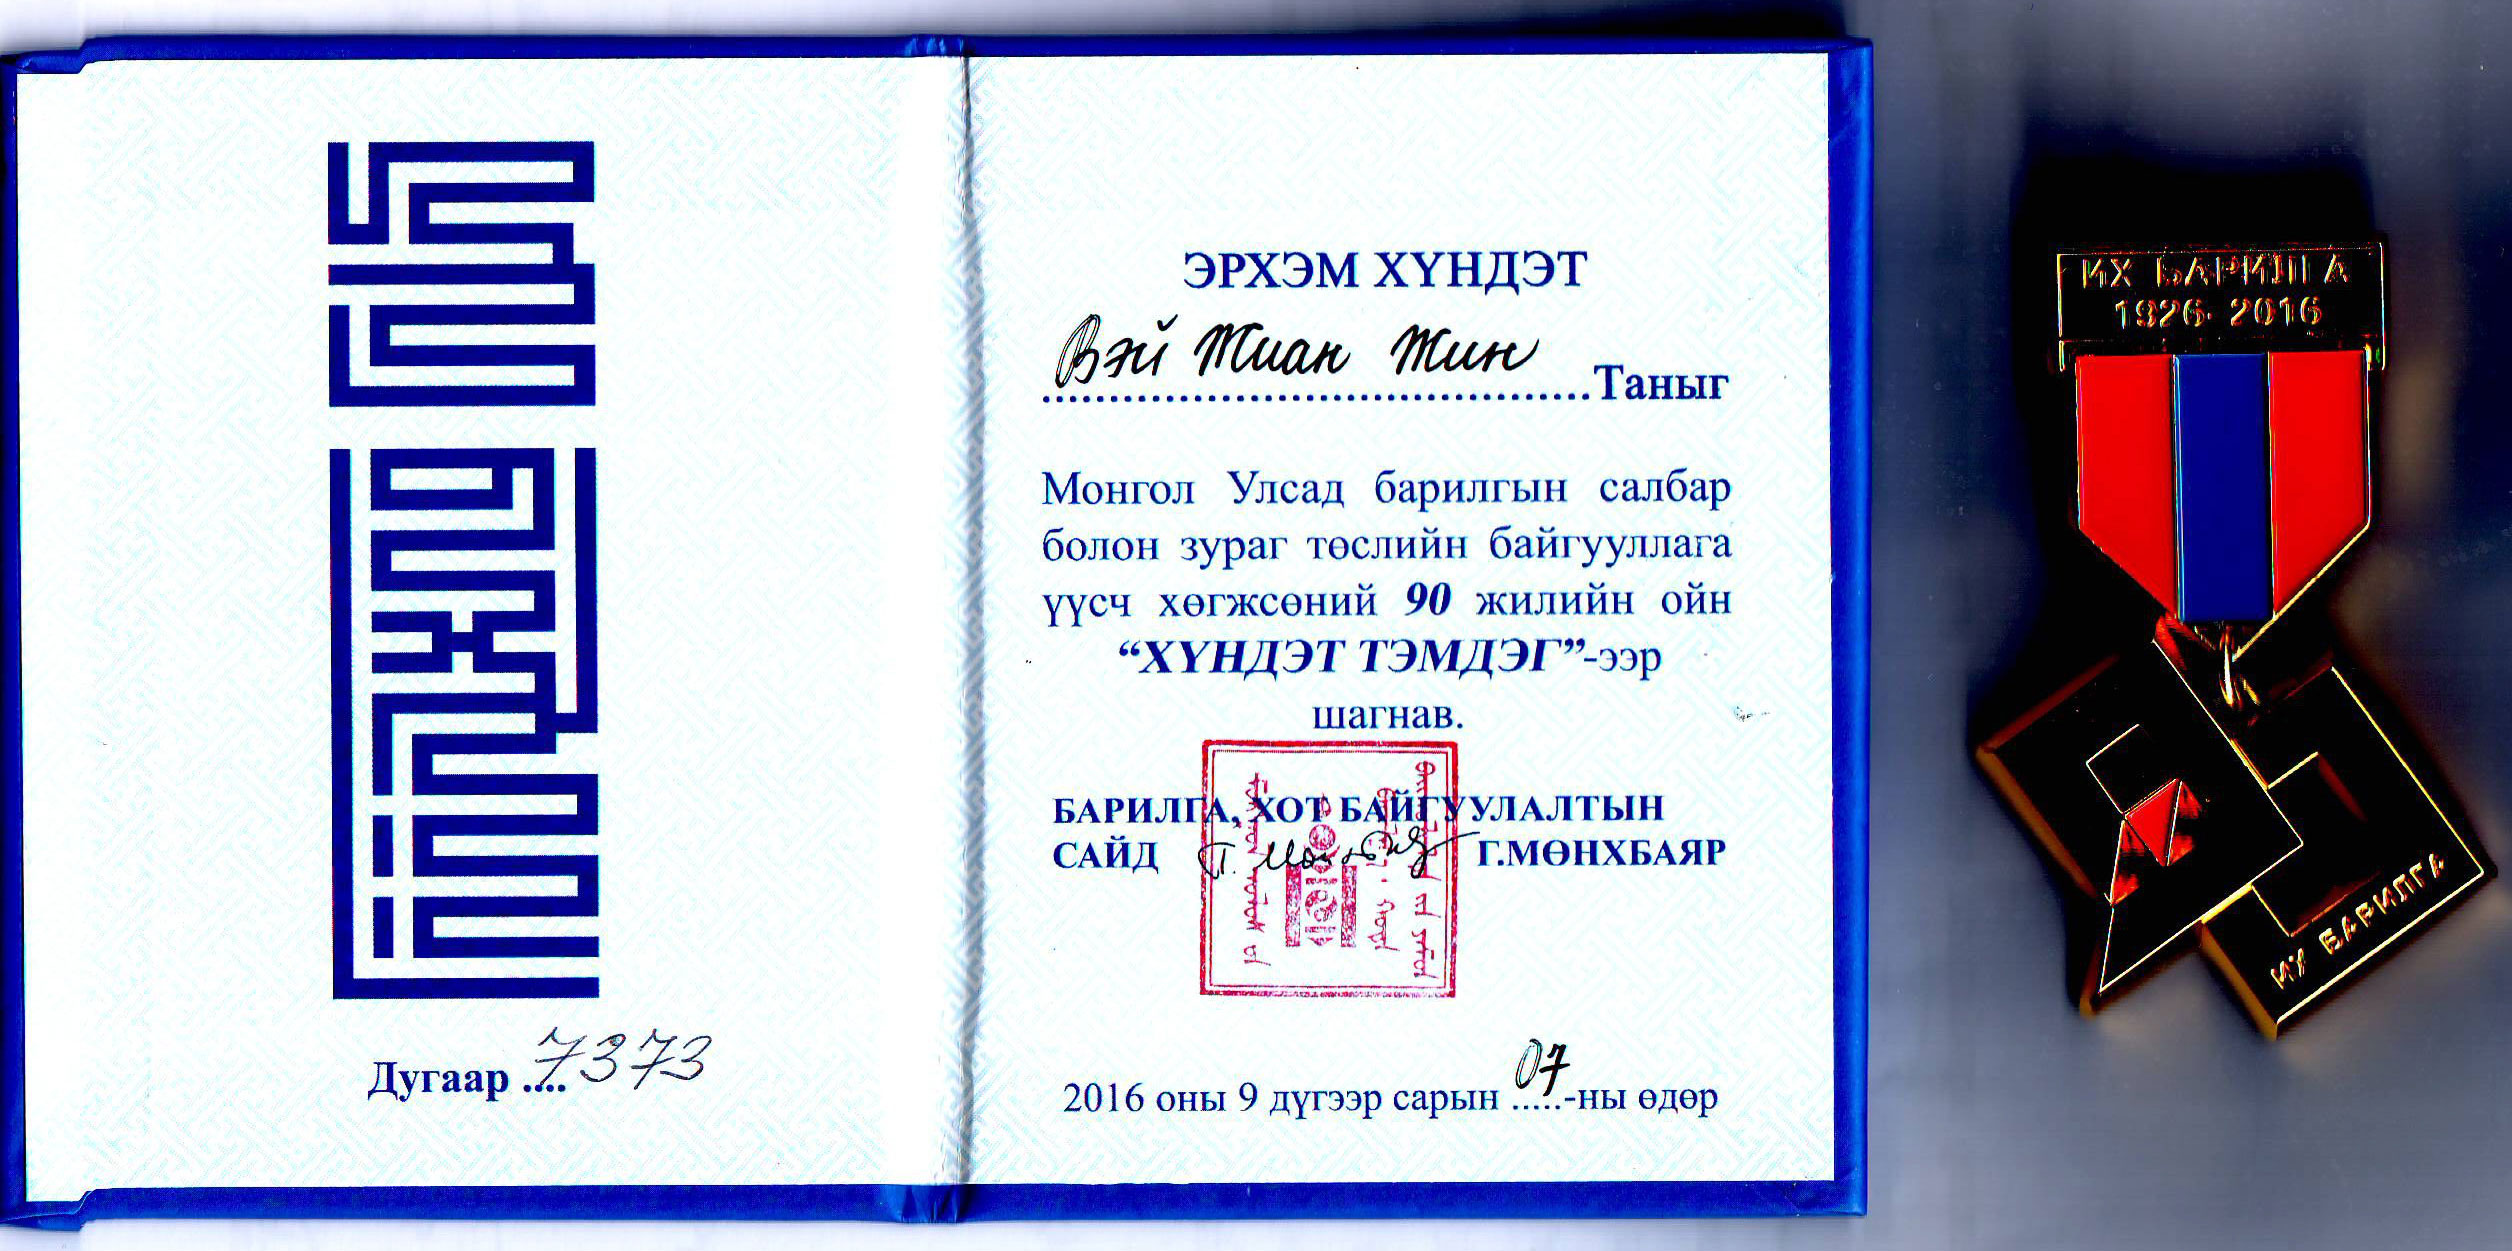  90th Anniversary Medal of Honnor of Mongolia’s construction industry 